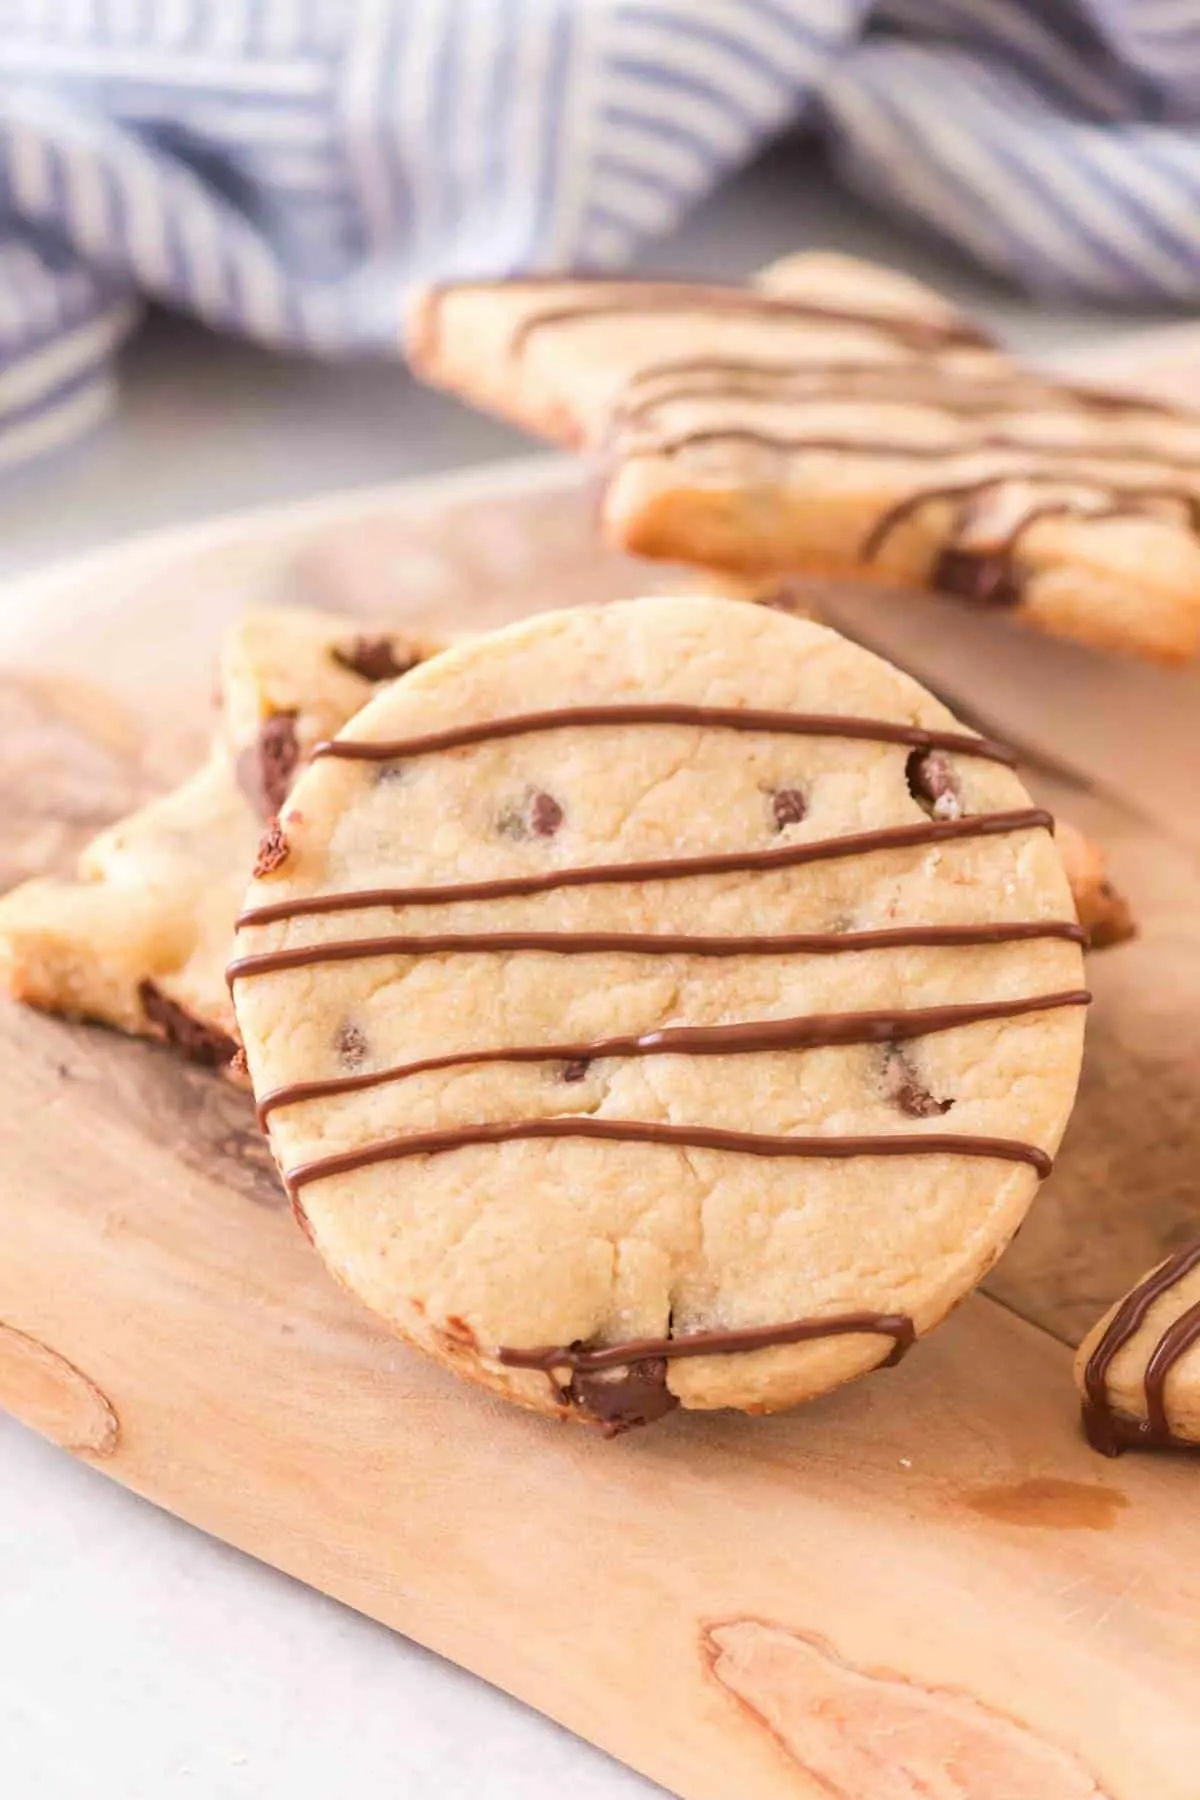 Chocolate Chip Sugar Cookies are an easy rolled sugar cookie recipe loaded with chocolate chips.